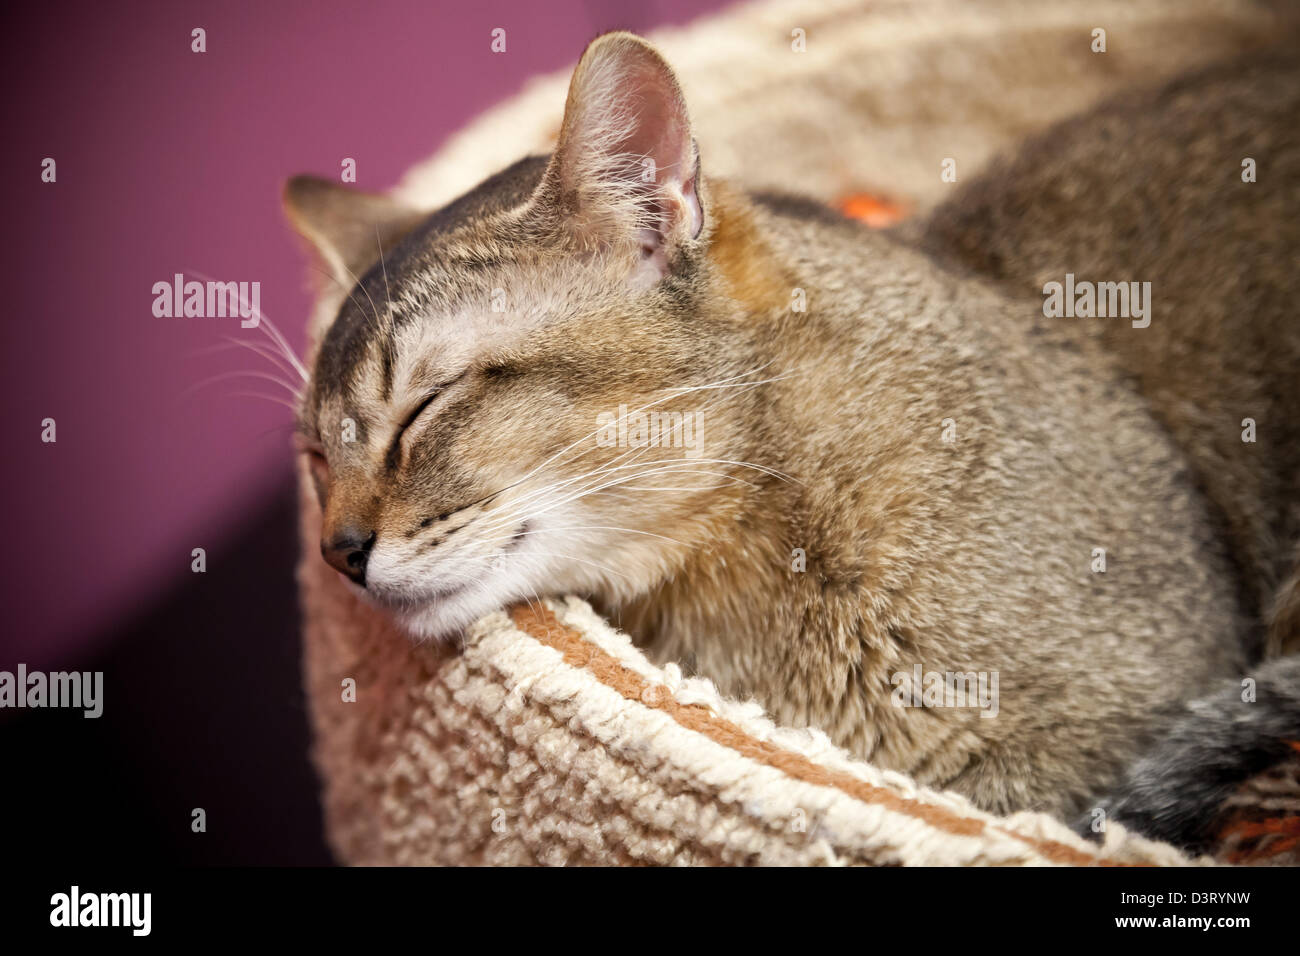 Brown short-haired cat sleeps on the bed Stock Photo